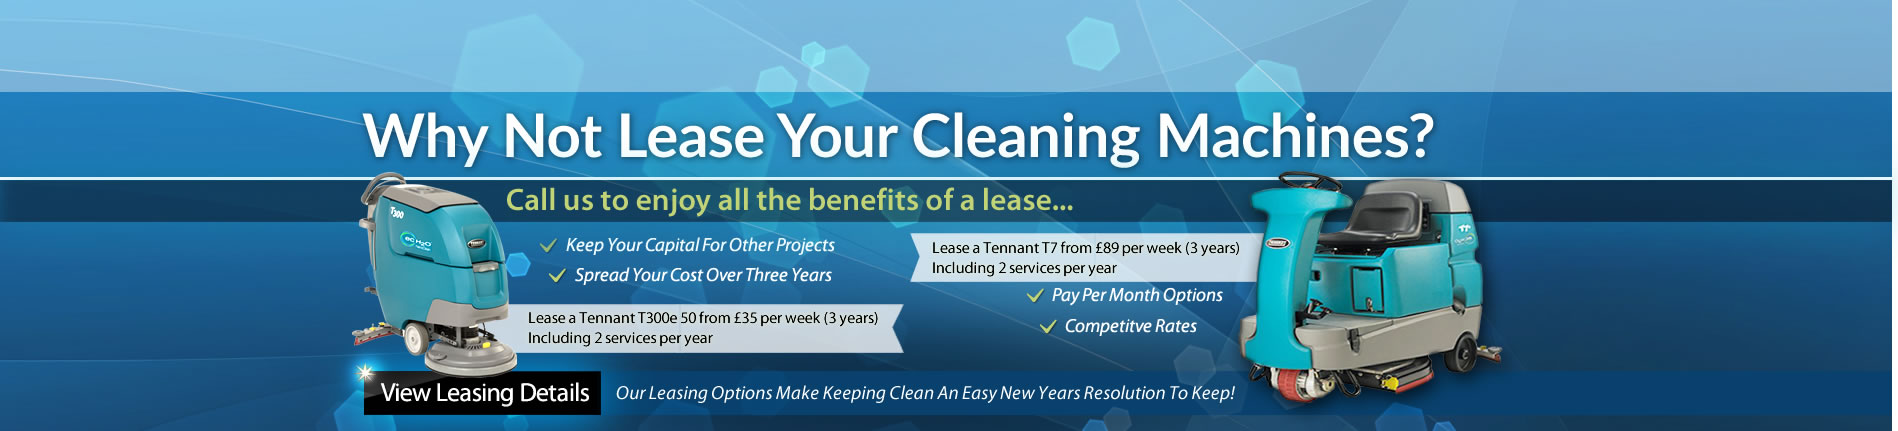 cleams-lease-banner-q1-2021